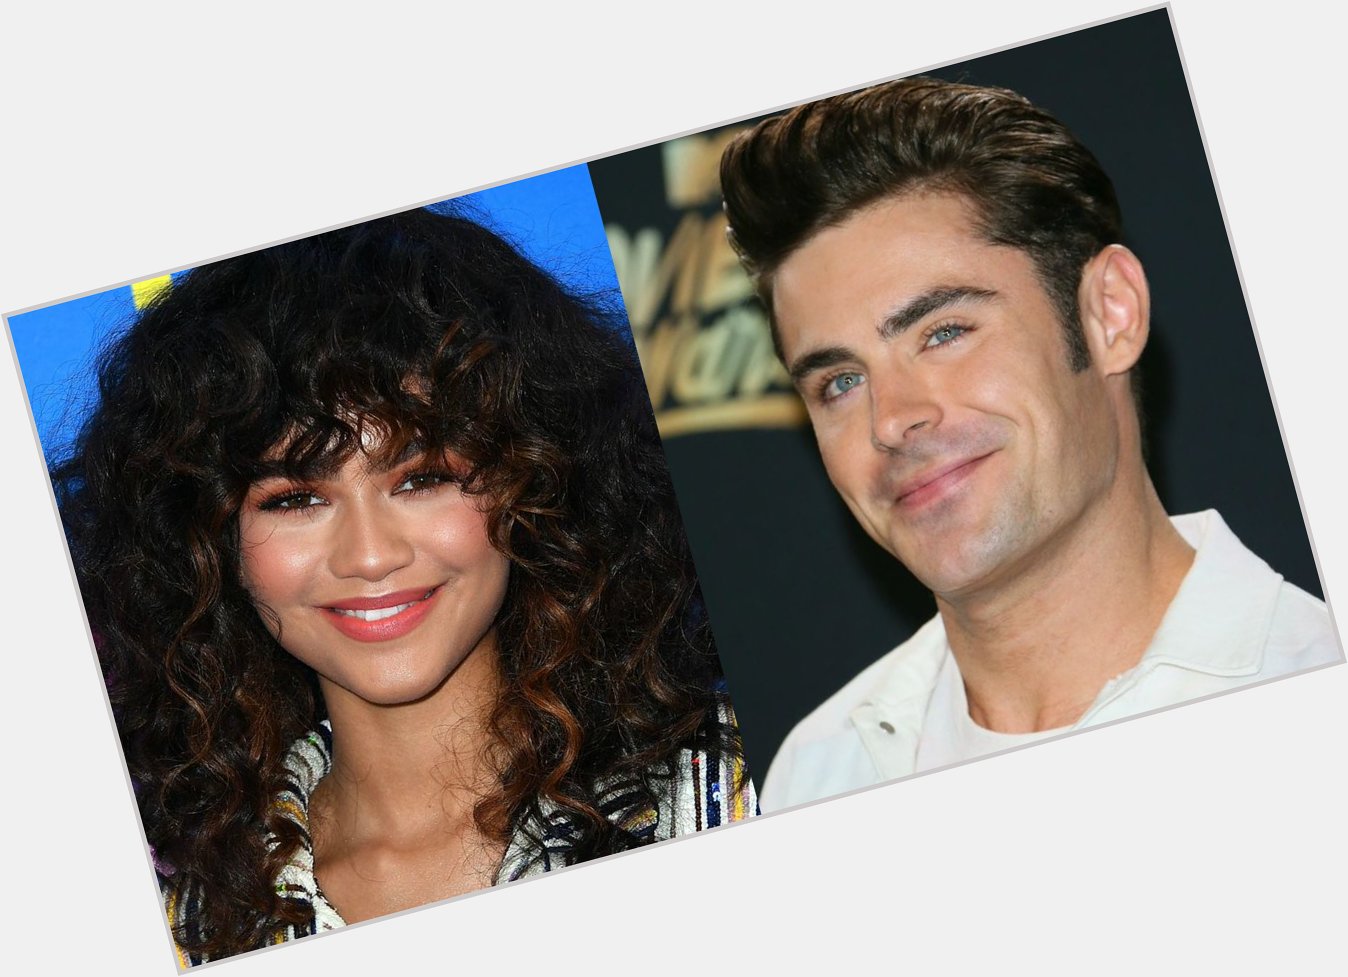 Zac Efron Wishes Goofball Zendaya A Happy Birthday With A Silly Pic  